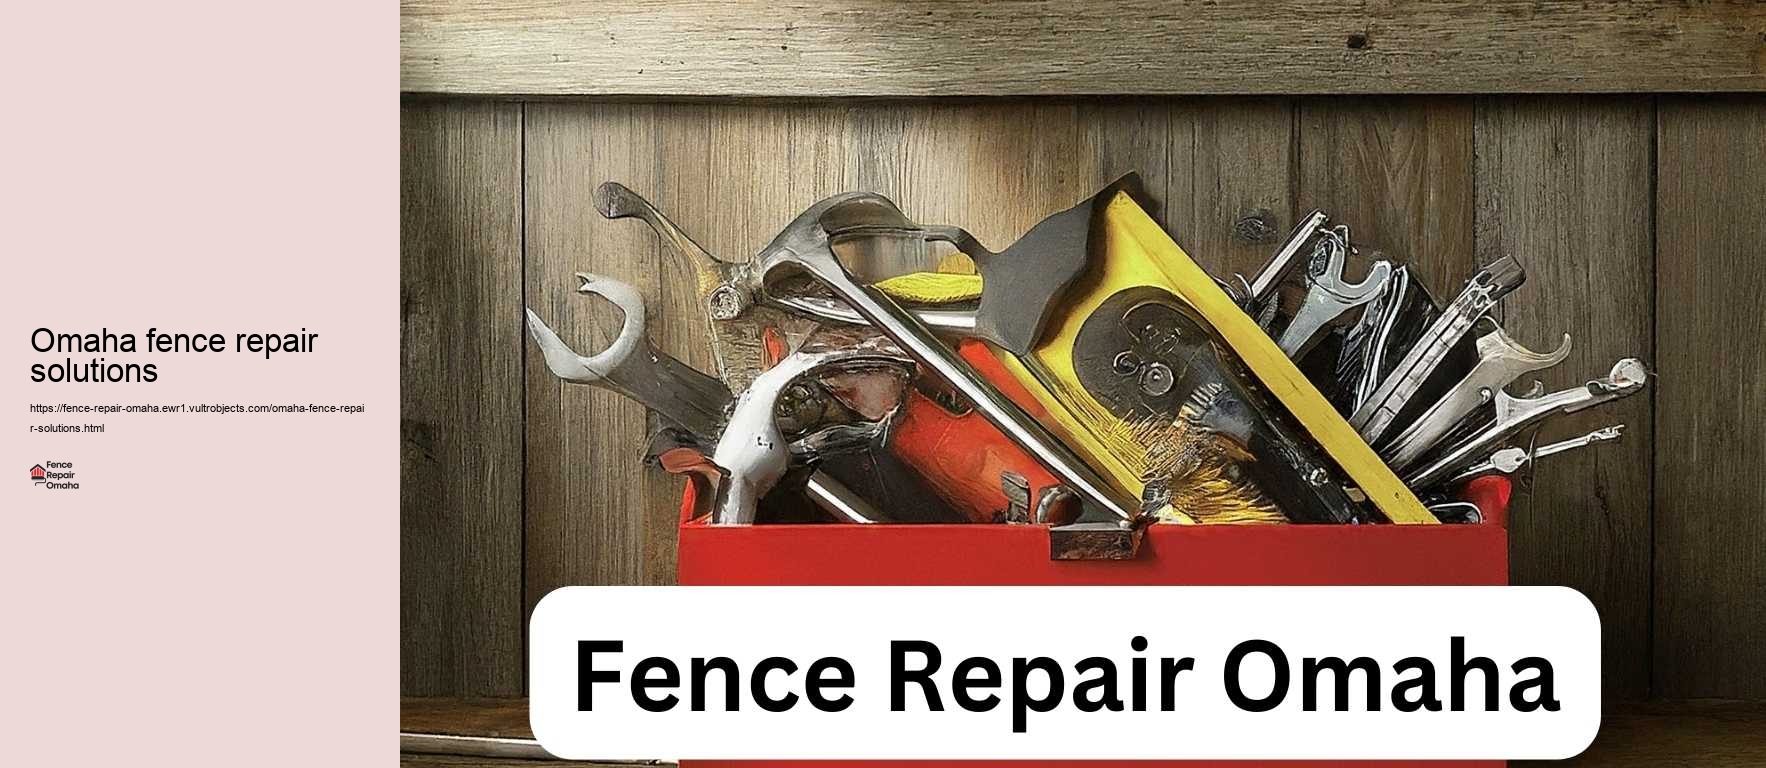 Omaha fence repair solutions